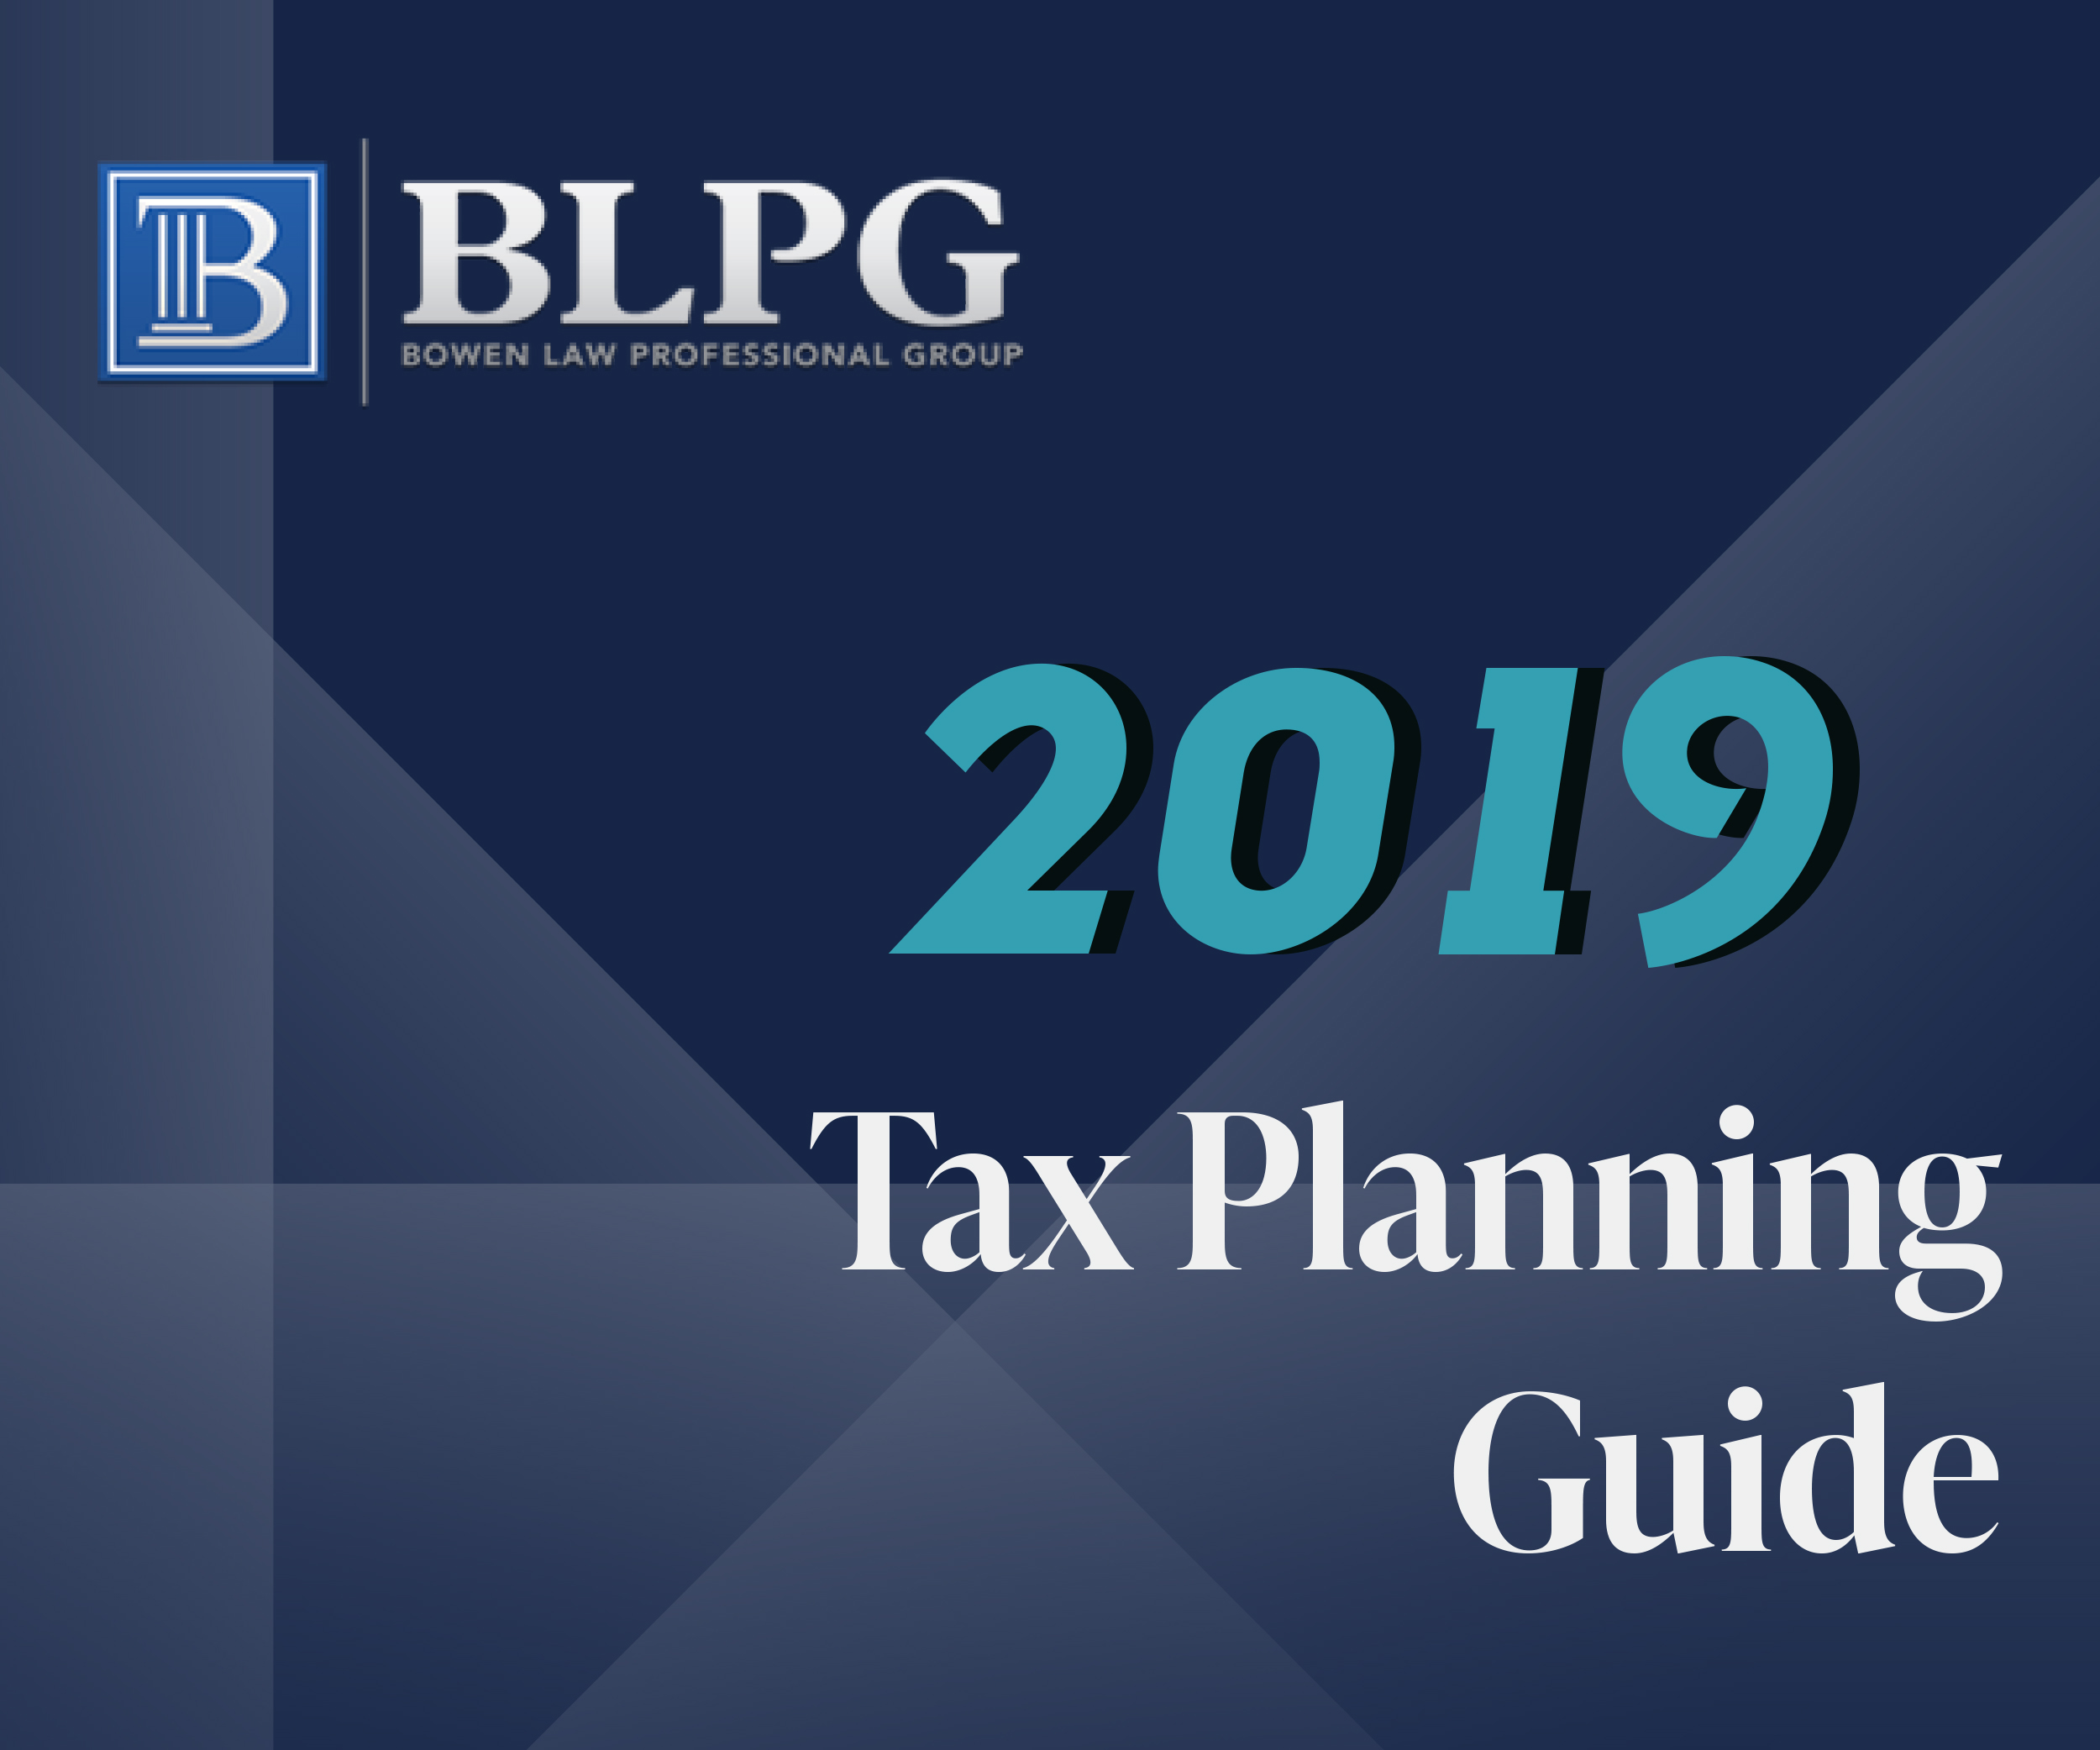 Tax Planning Guide 2019